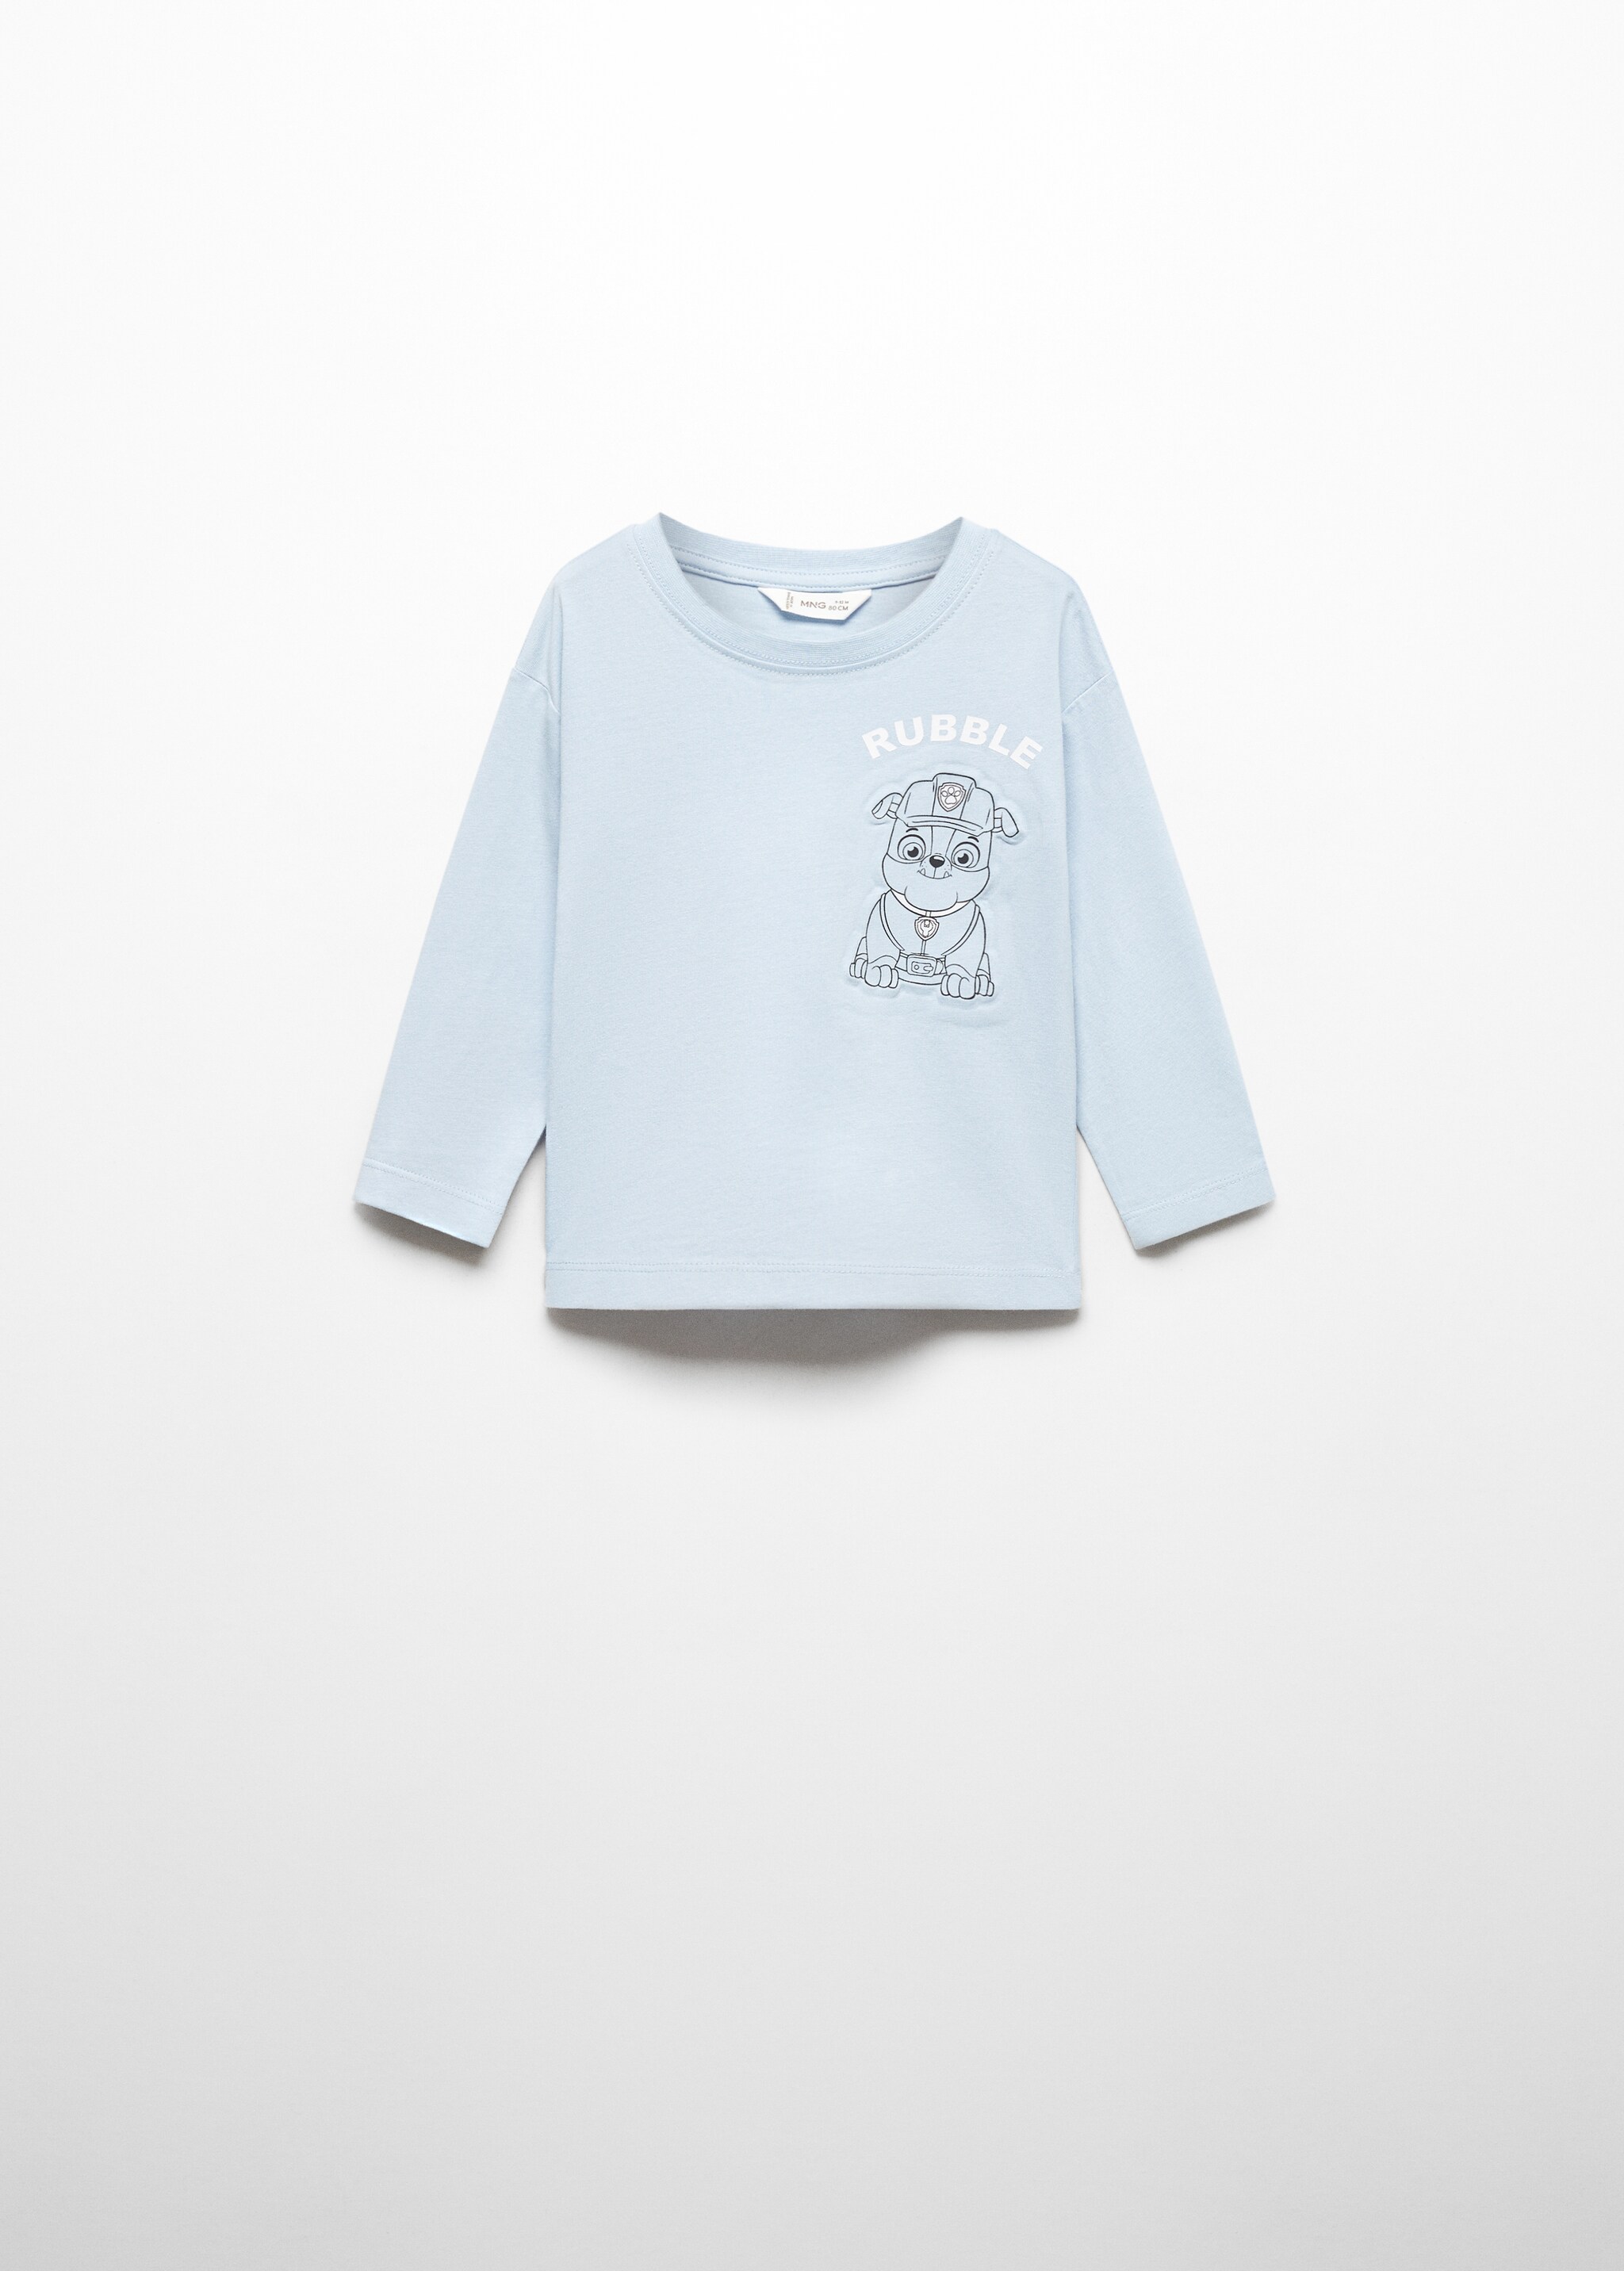 Paw Patrol T-shirt - Article without model